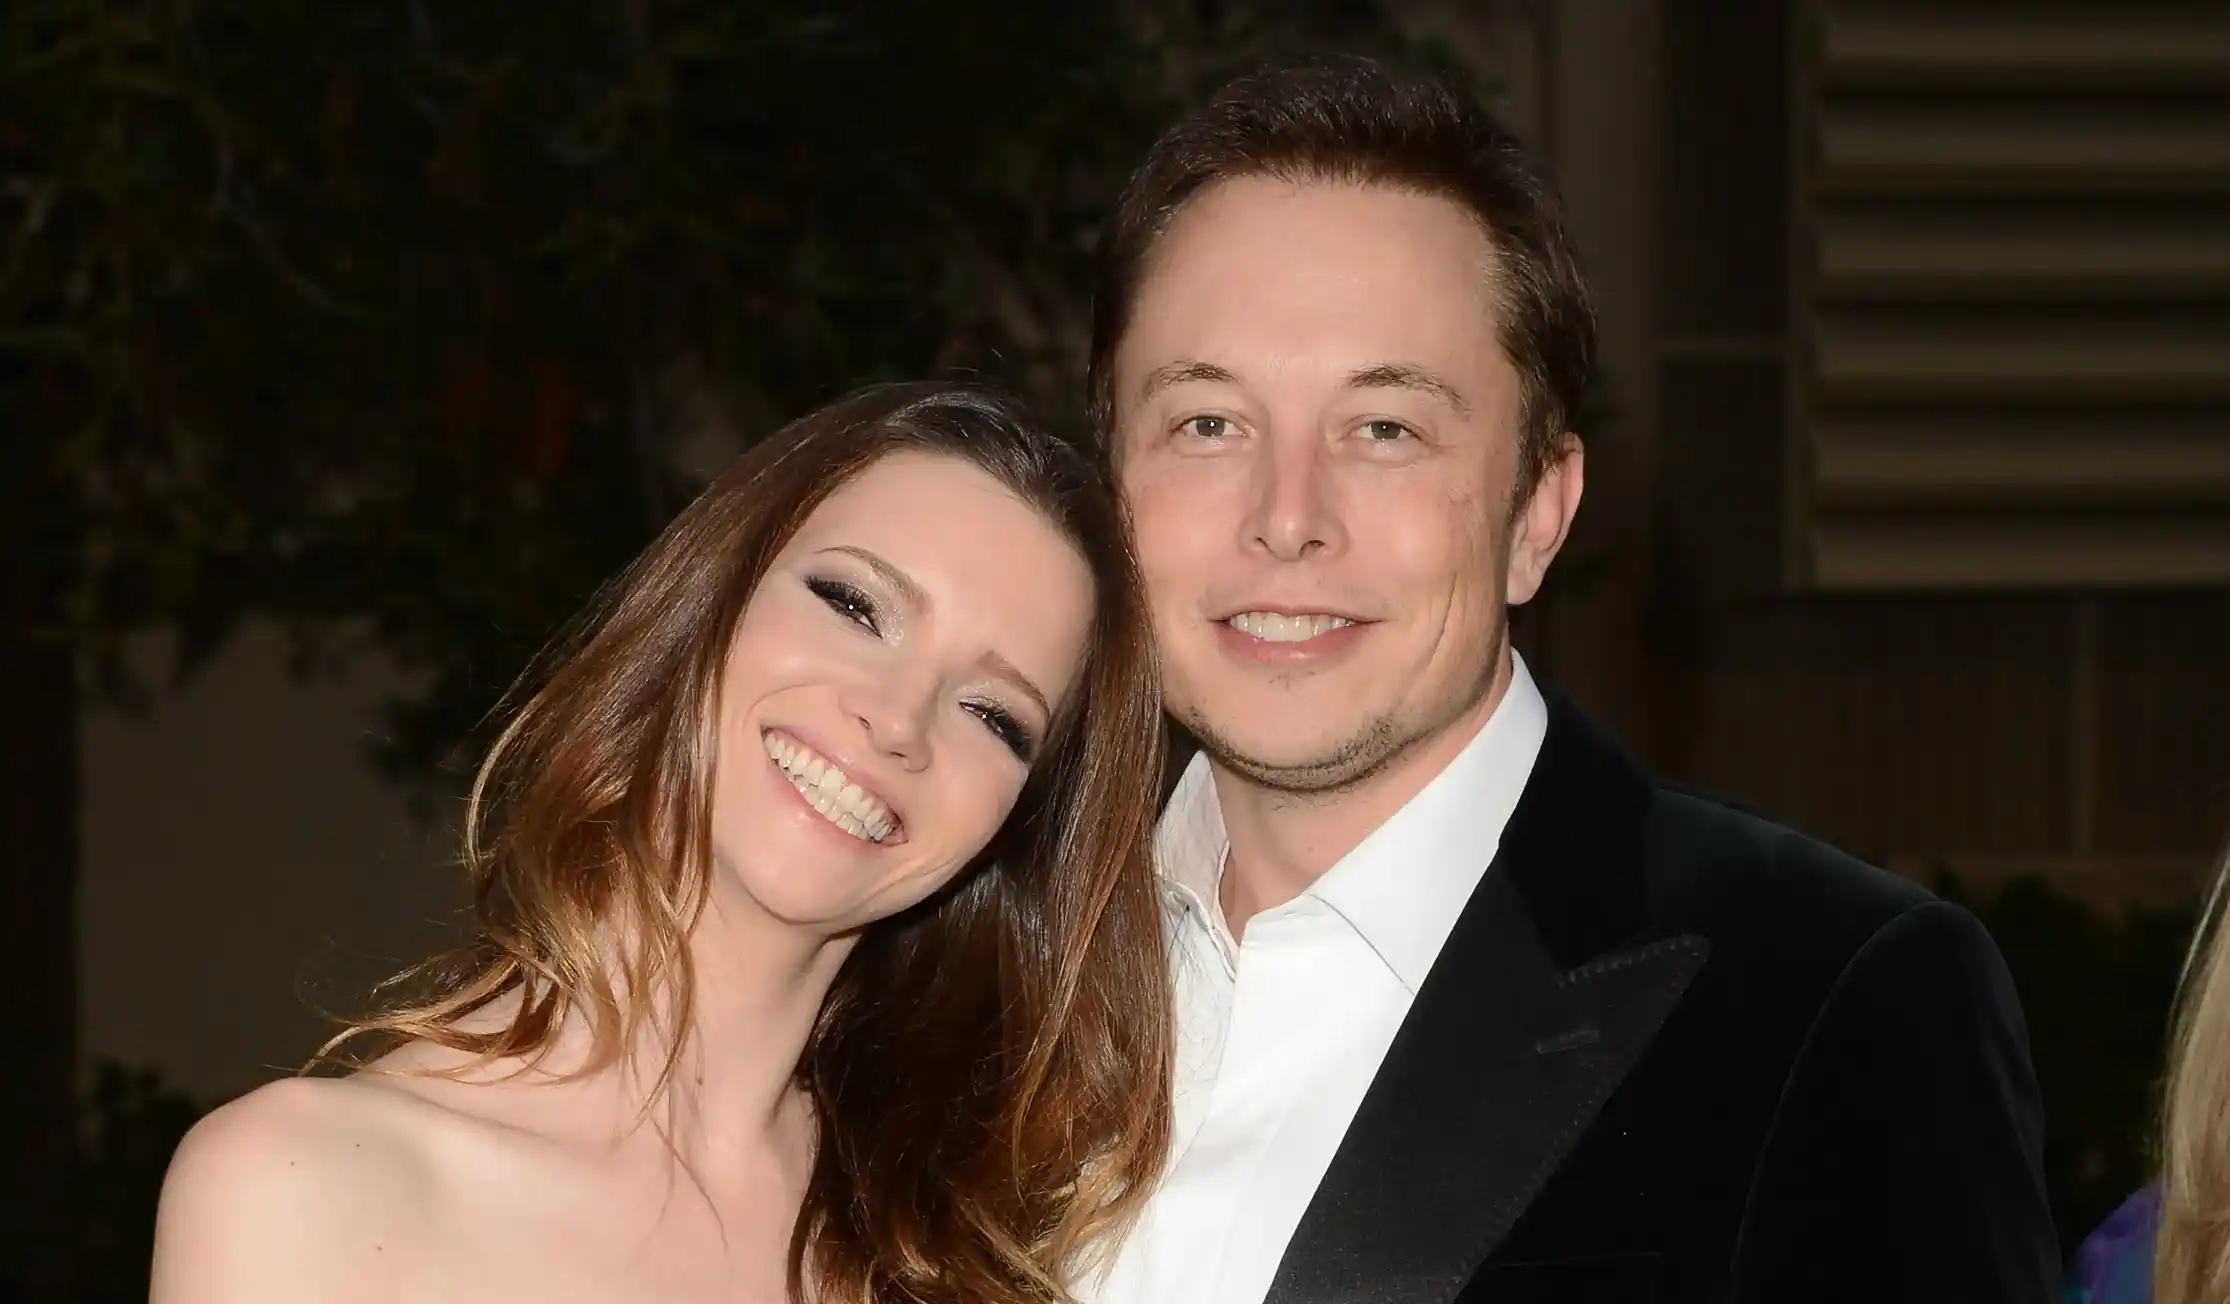 Ex-wife Talulah Riley denies Ghislaine Maxwell hired her as a “novia infantil” for Tesla and SpaceX CEO Elon Musk.